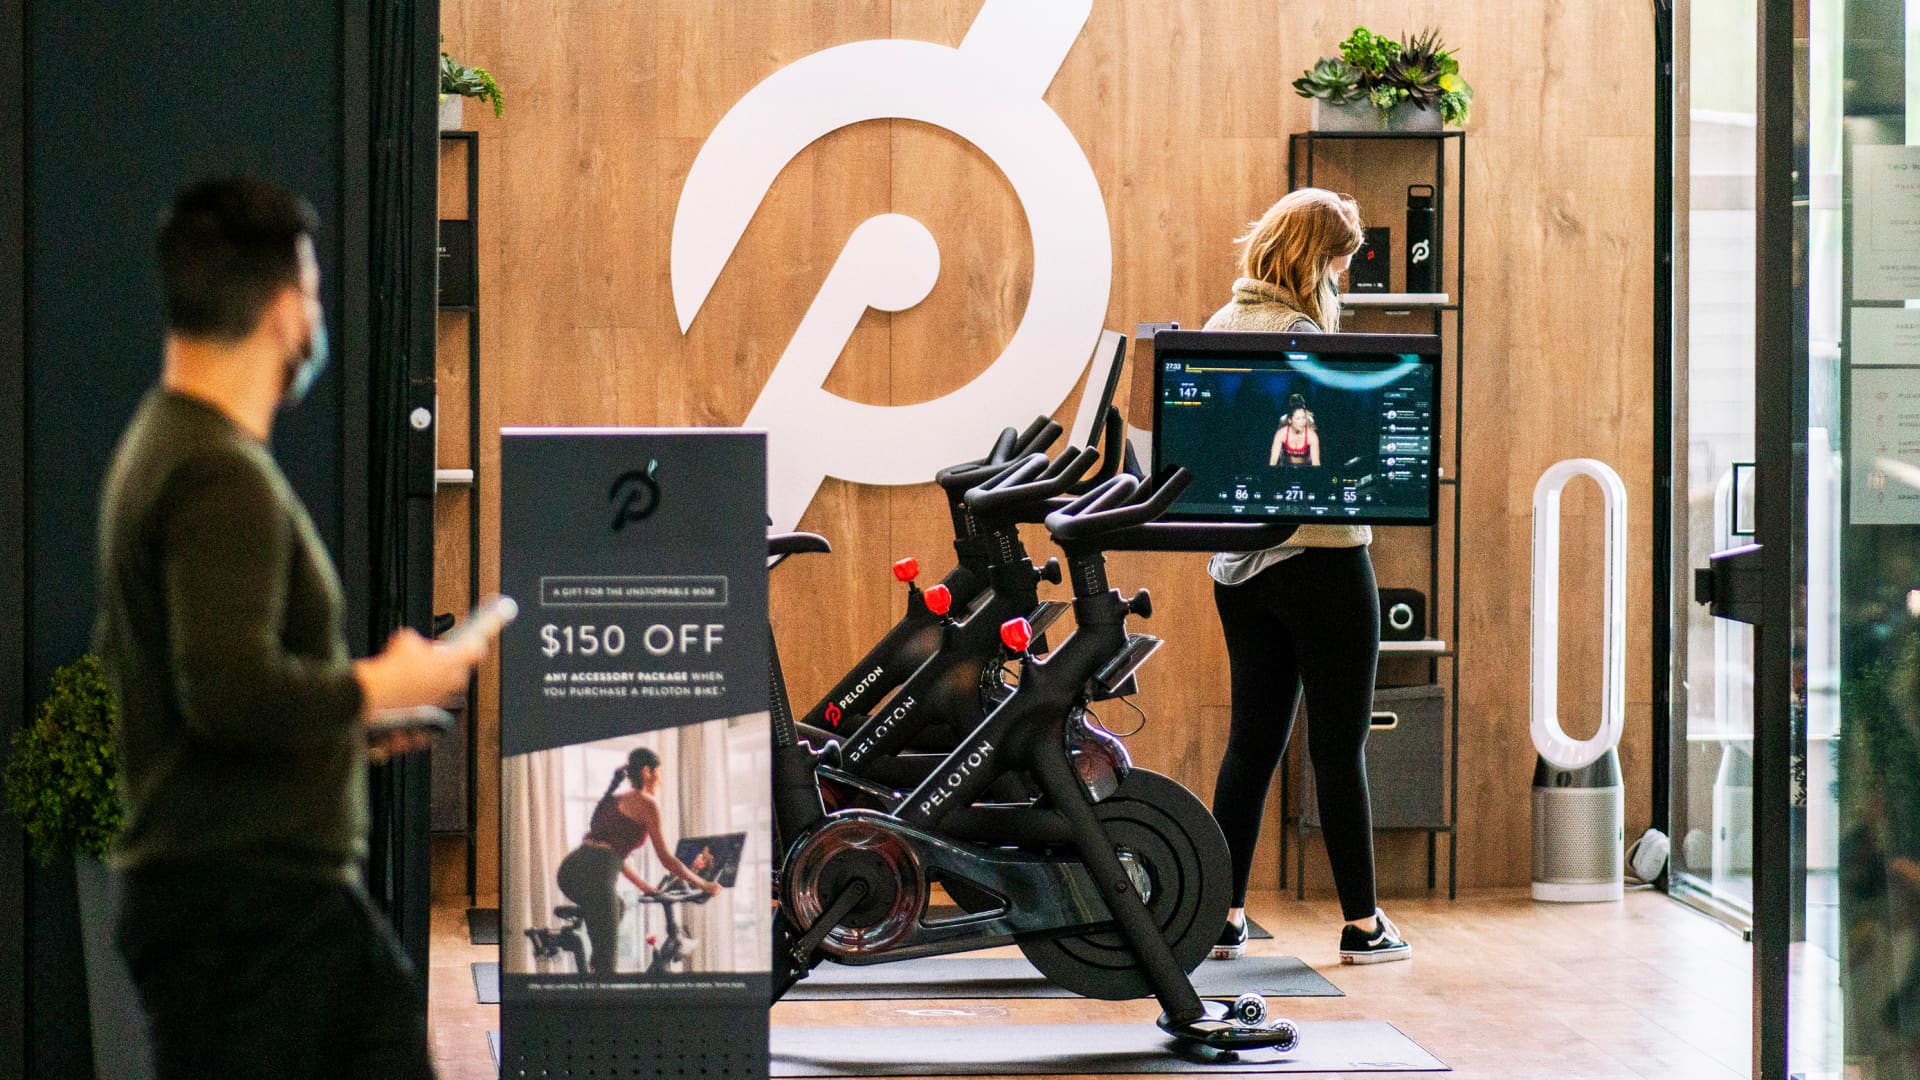 Peloton CEO says company has 6 months to show it can survive, 500 job cuts coming, report says